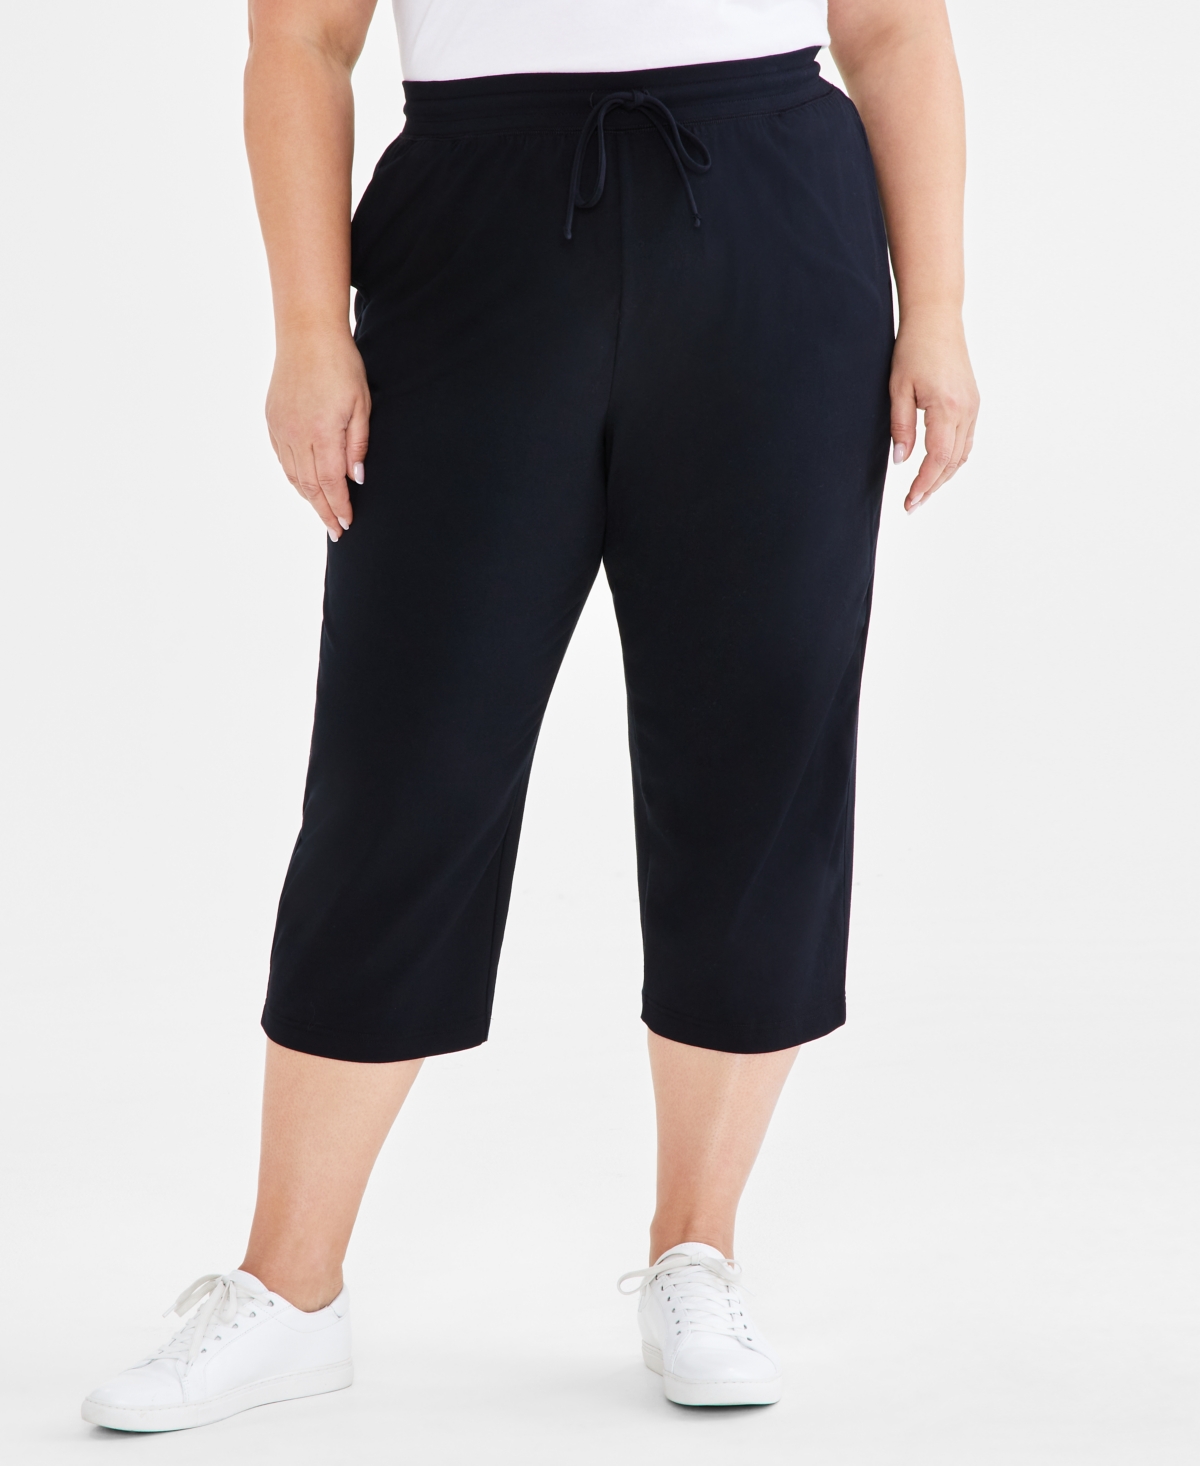 Style & Co Plus Size Knit Pull-On Capri Pants, Created for Macy's